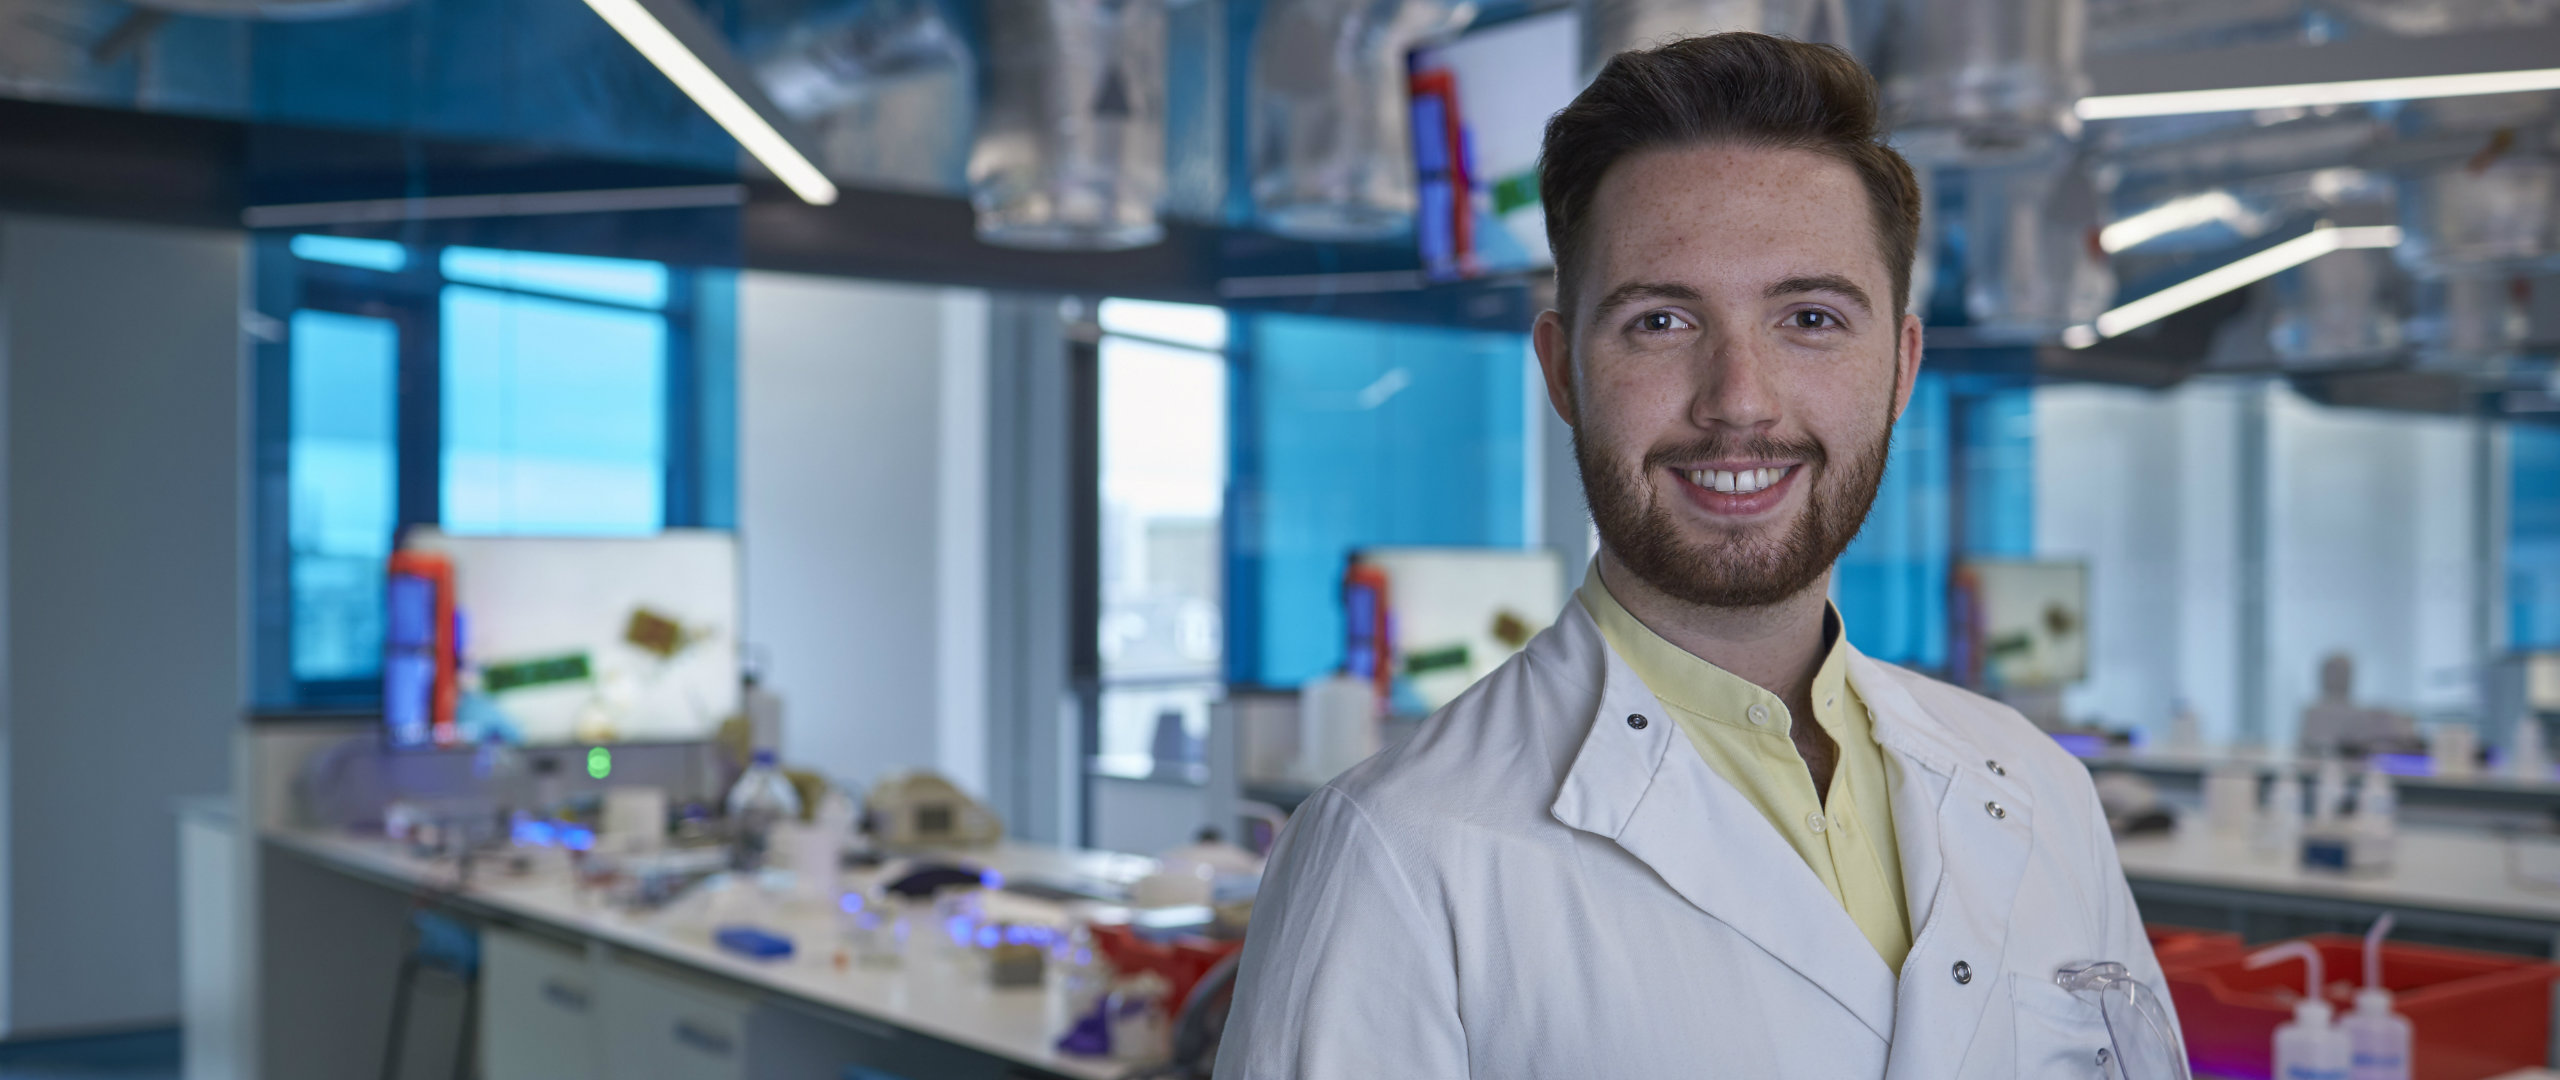 Smiling male standing in a science laboratory